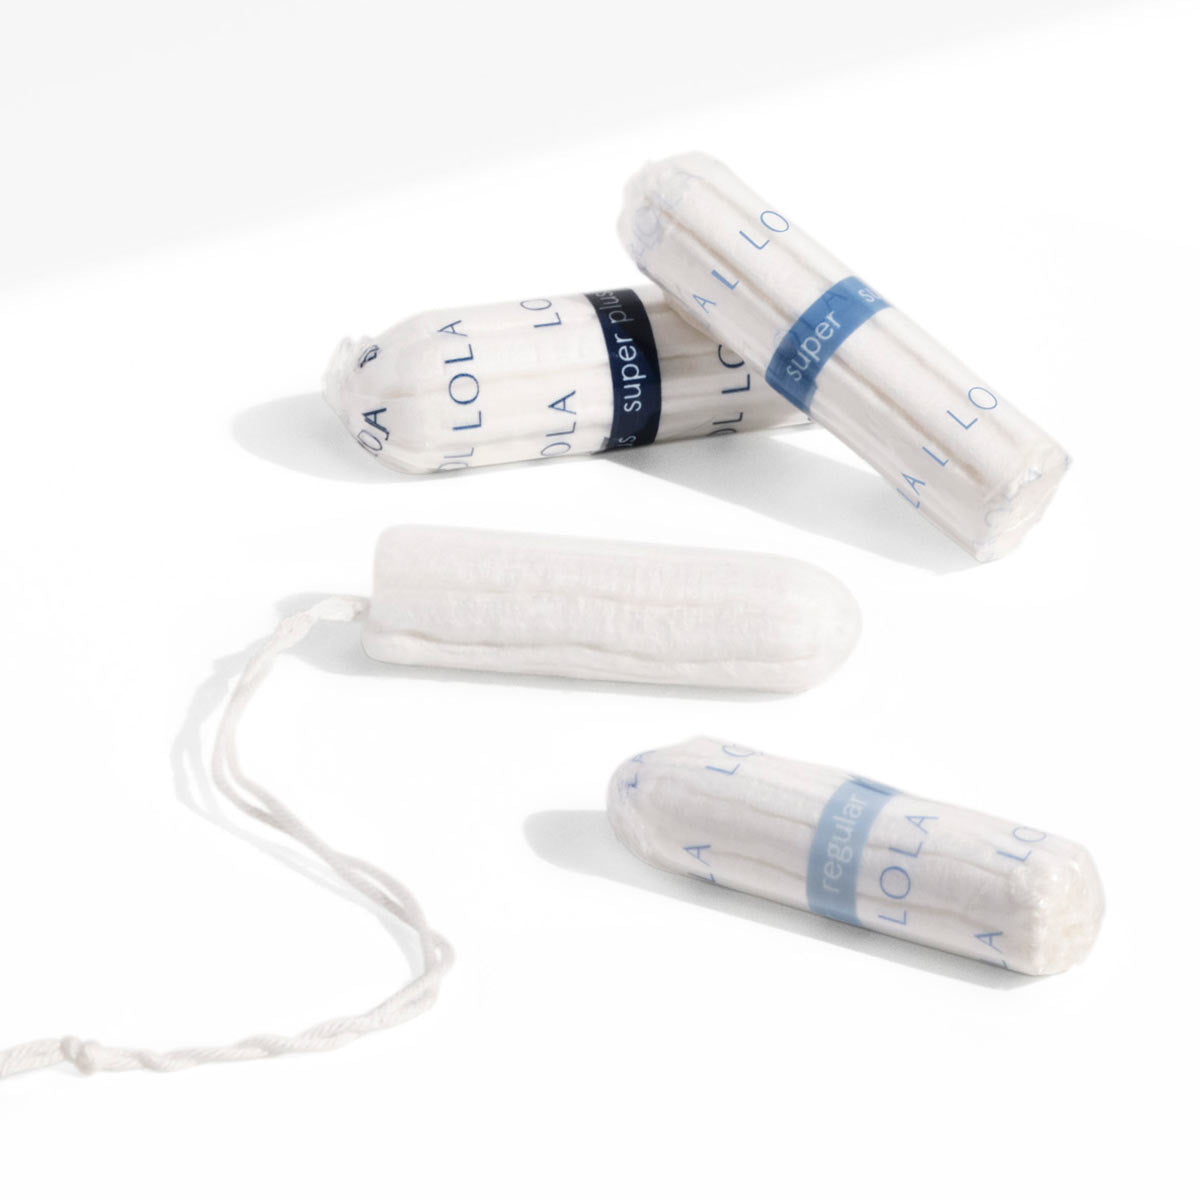 Non-applicator Tampons: Every 3 months